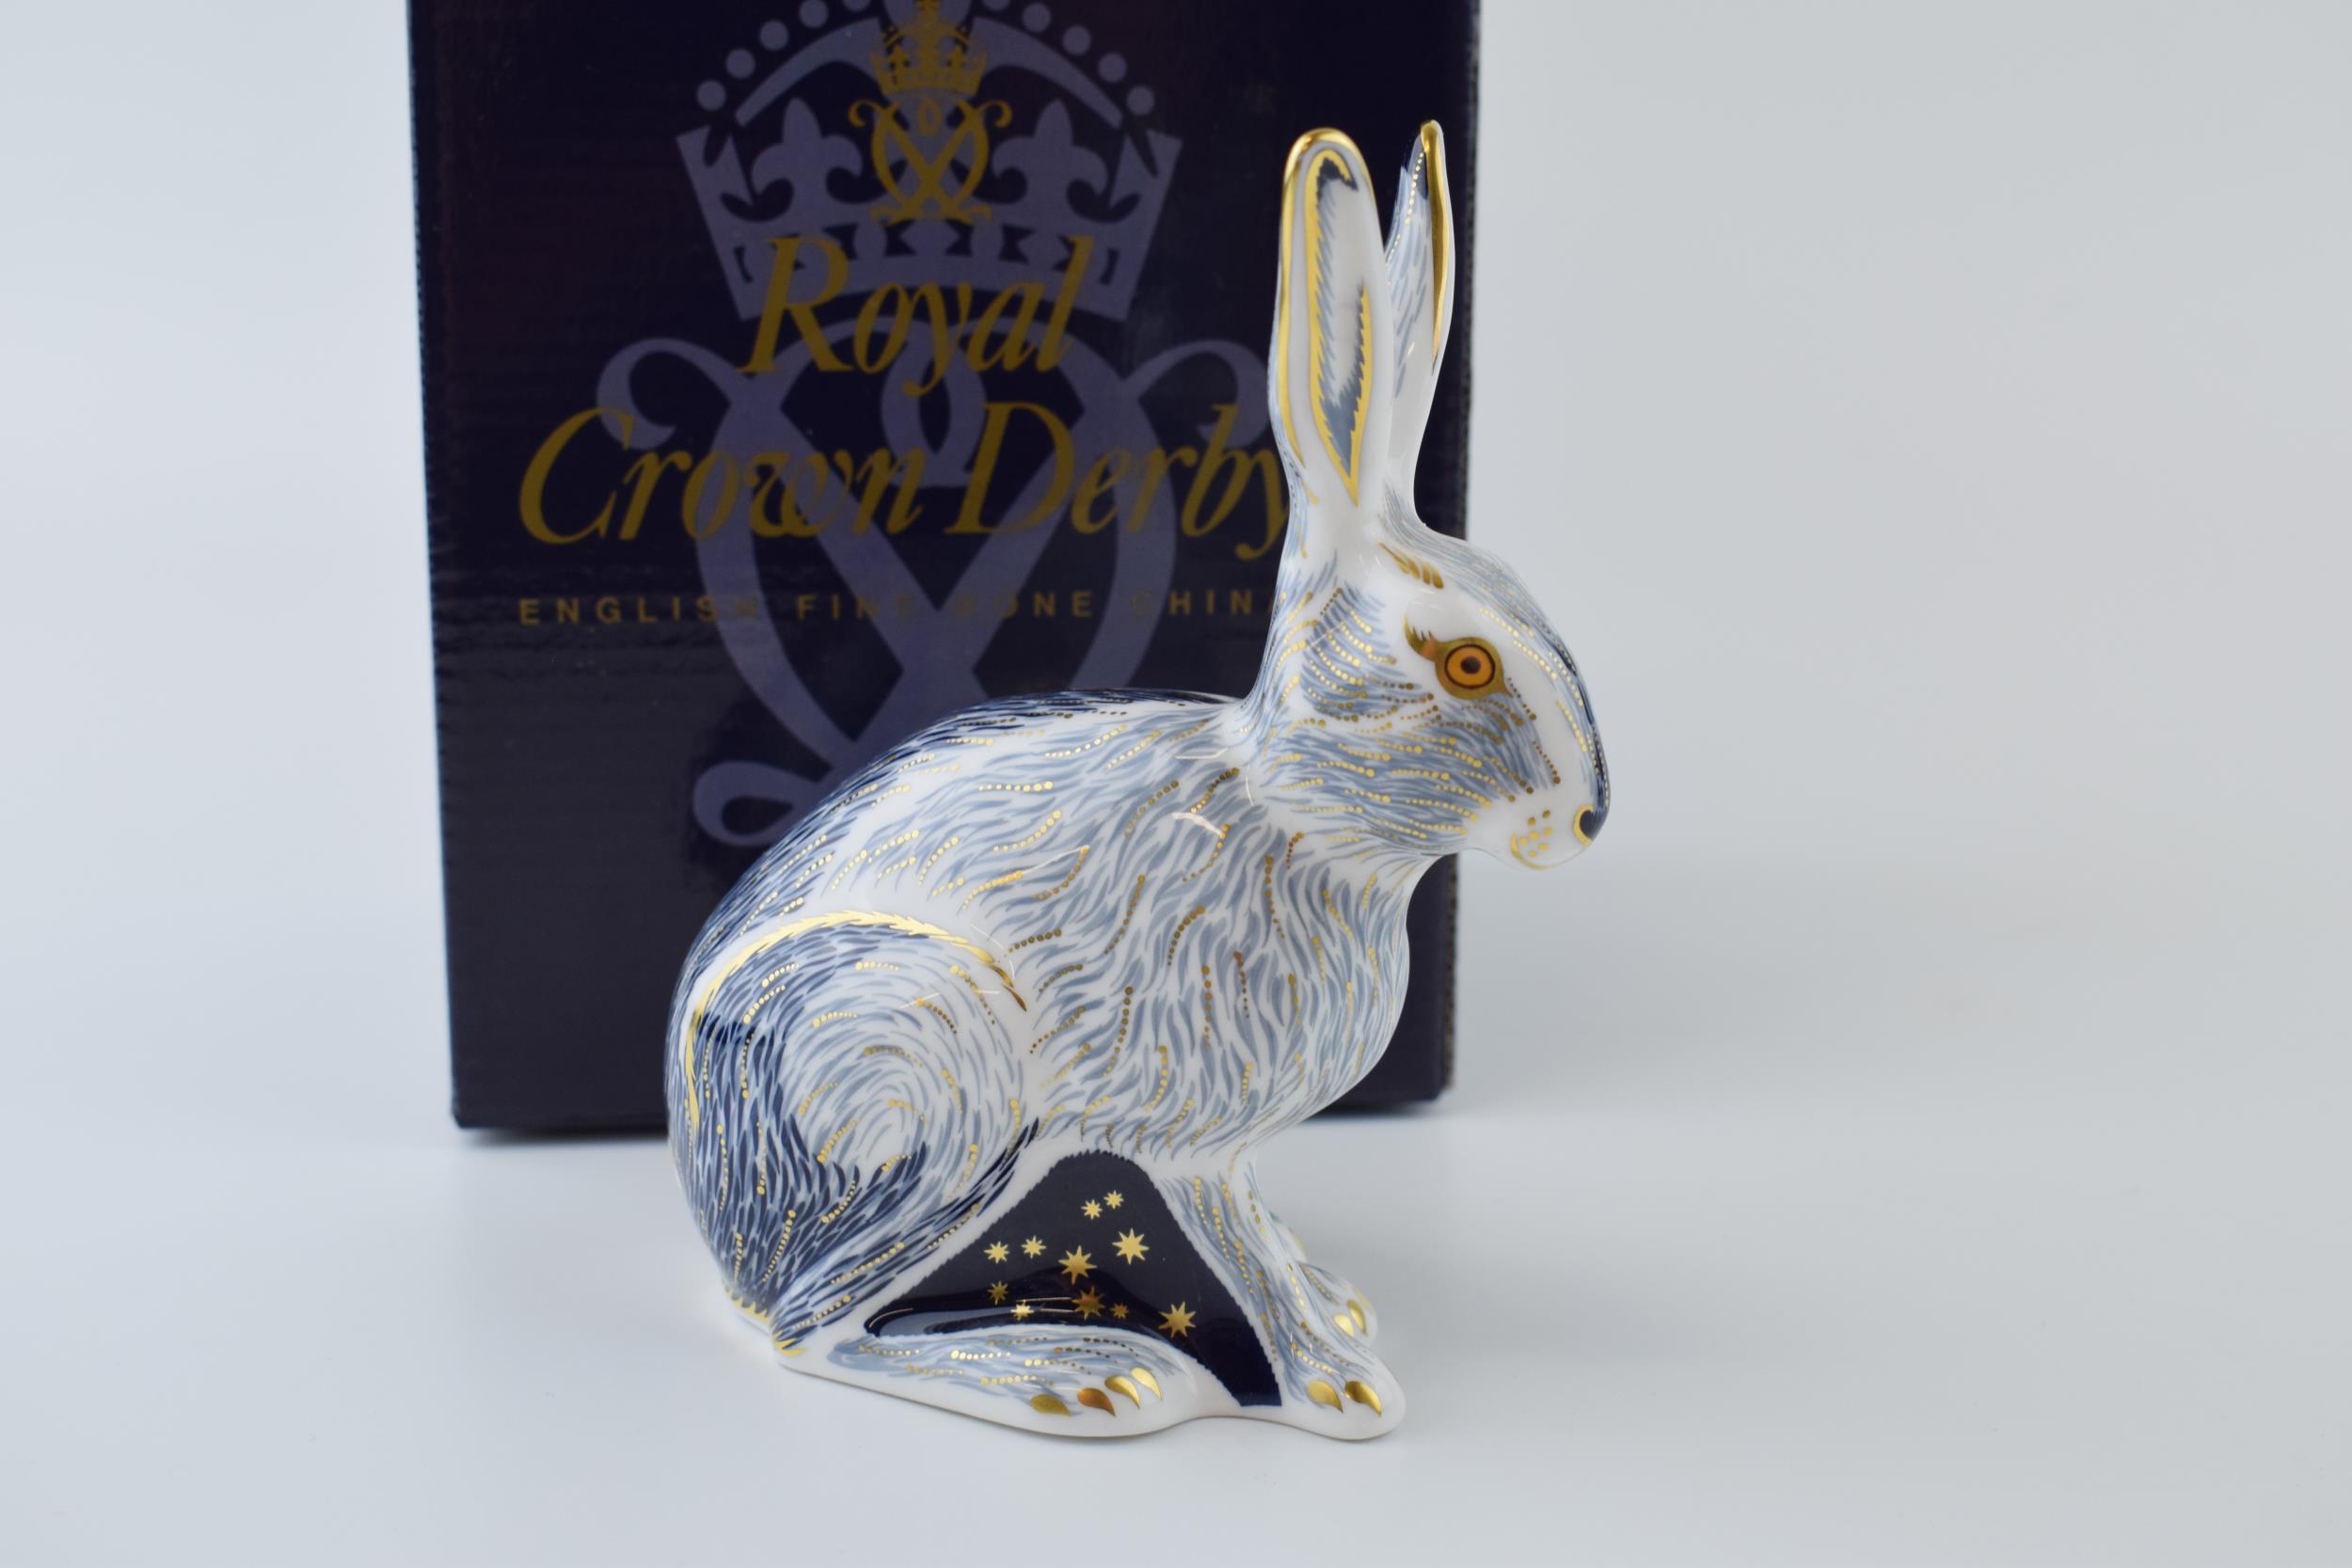 Royal Crown Derby Paperweight - Starlight Hare, 13.5cm tall, exclusive to the Royal Crown Derby - Image 2 of 3